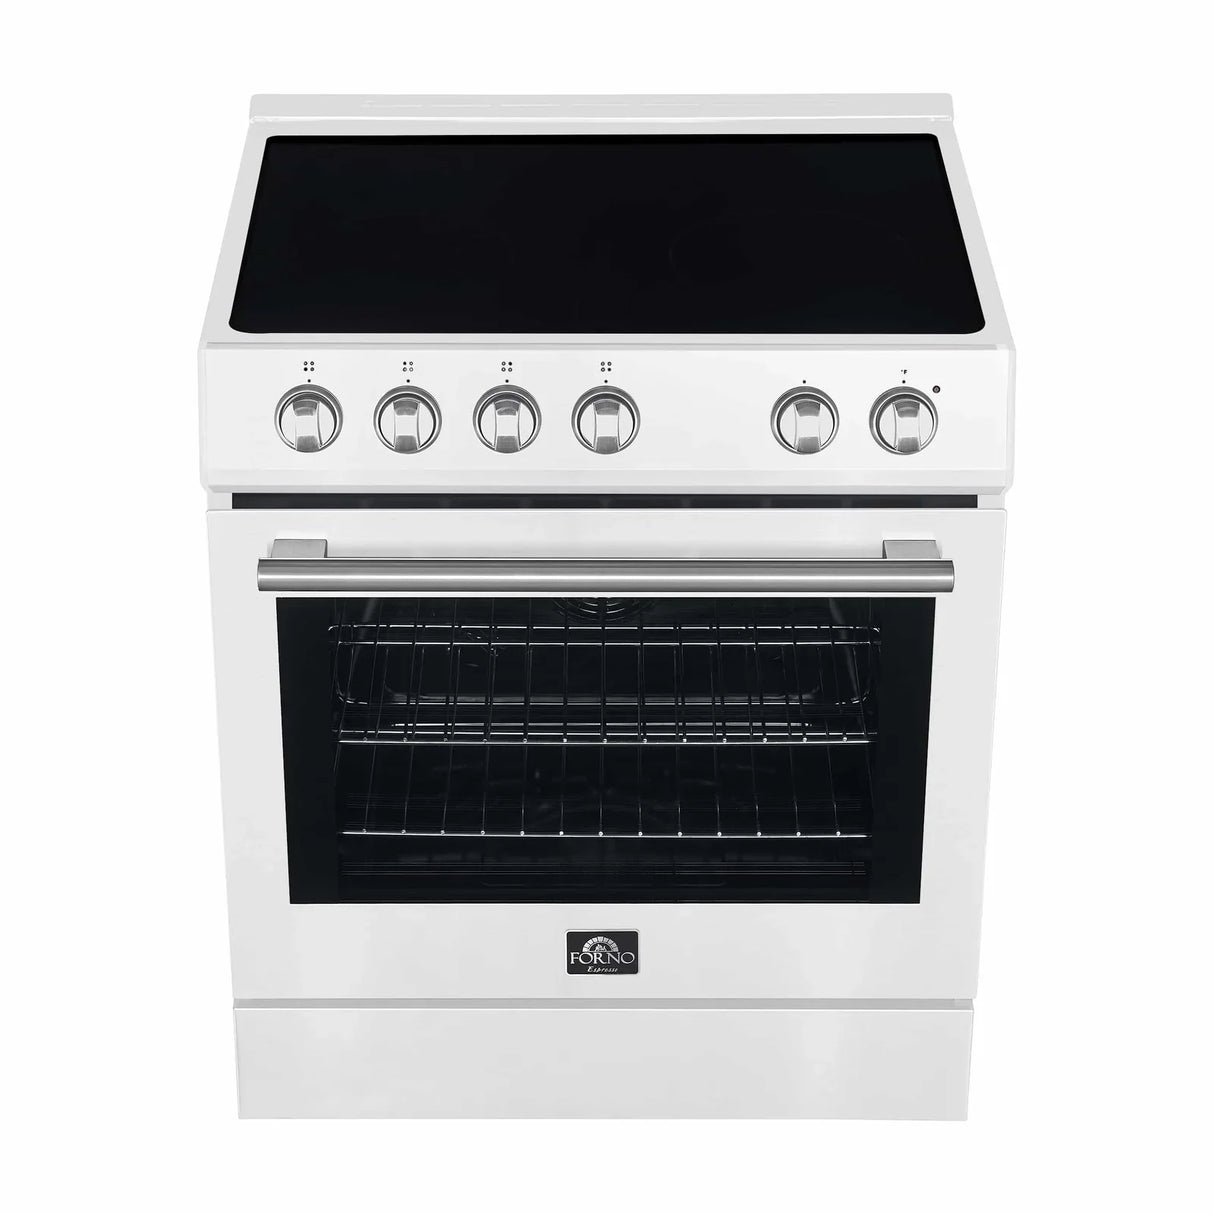 Forno Espresso 2-Piece Appliance Package - 30-Inch Electric Range with 5.0 Cu.Ft. Electric Oven and Refrigerator in White with Stainless Steel Handle